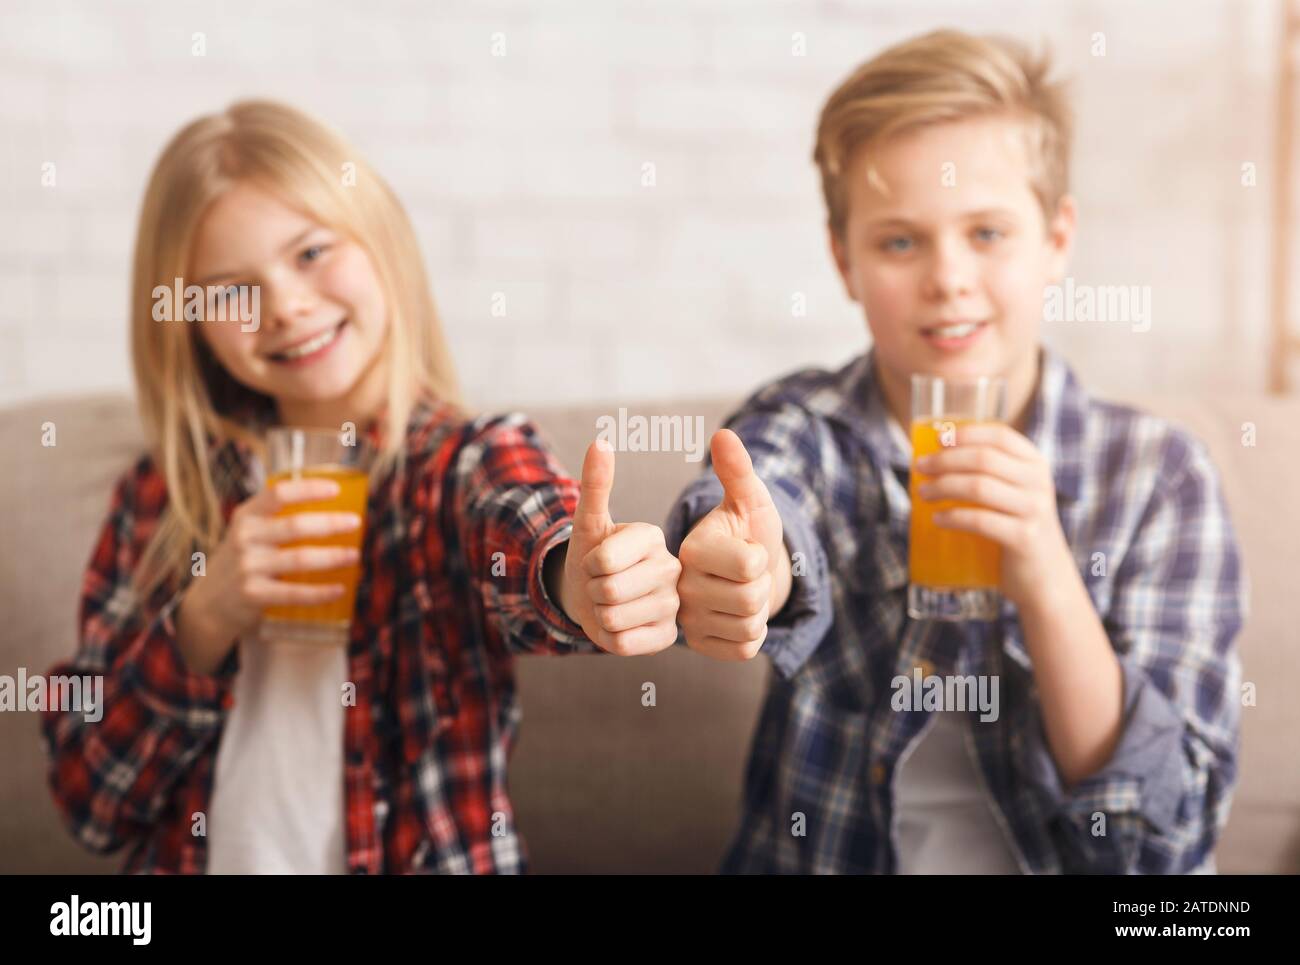 Boy And Girl Drinking Juice Gesturing Thumbs-Up Sitting On Sofa Stock Photo